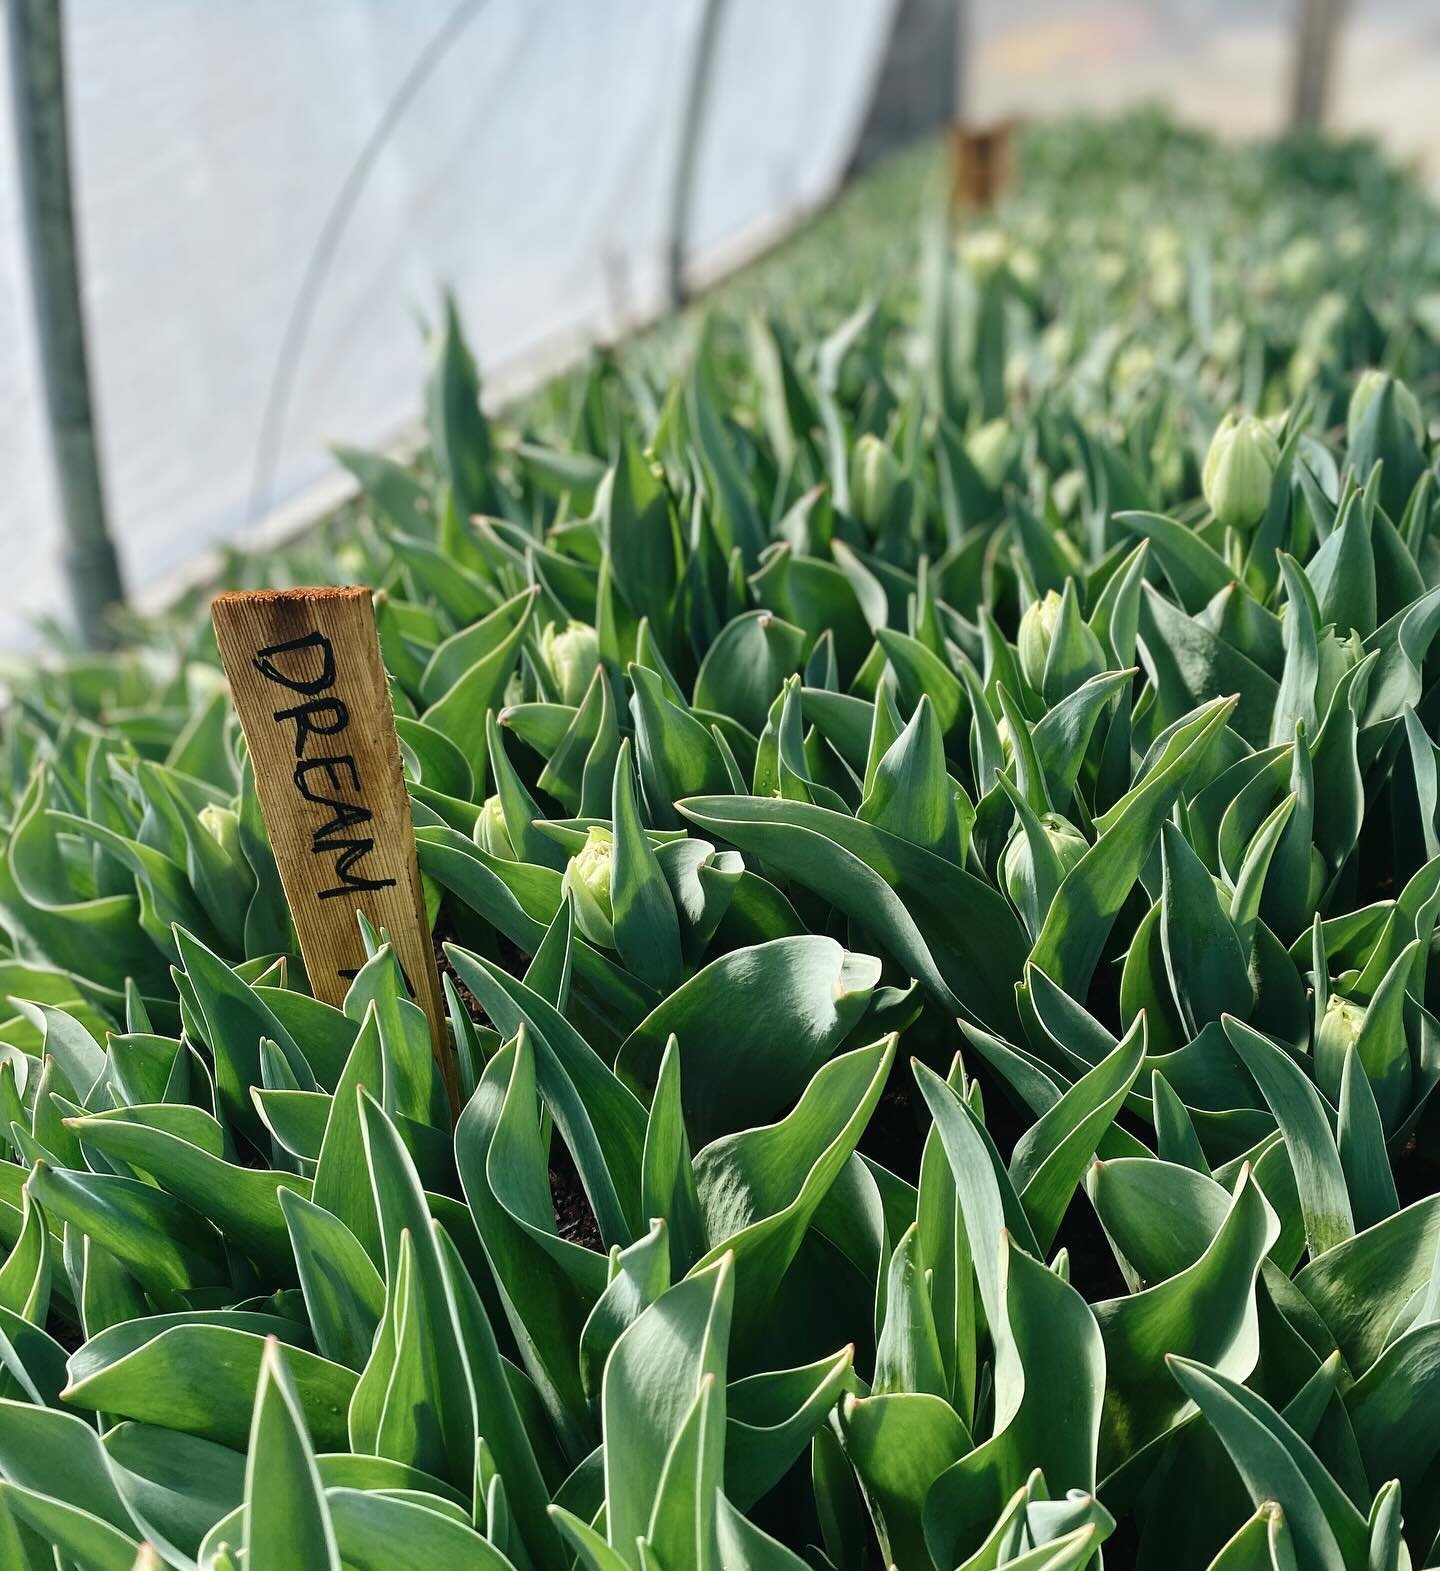 Tulips coming in hot! We&rsquo;ll have flowers available within the week- stay tuned! 🥳🌷☀️